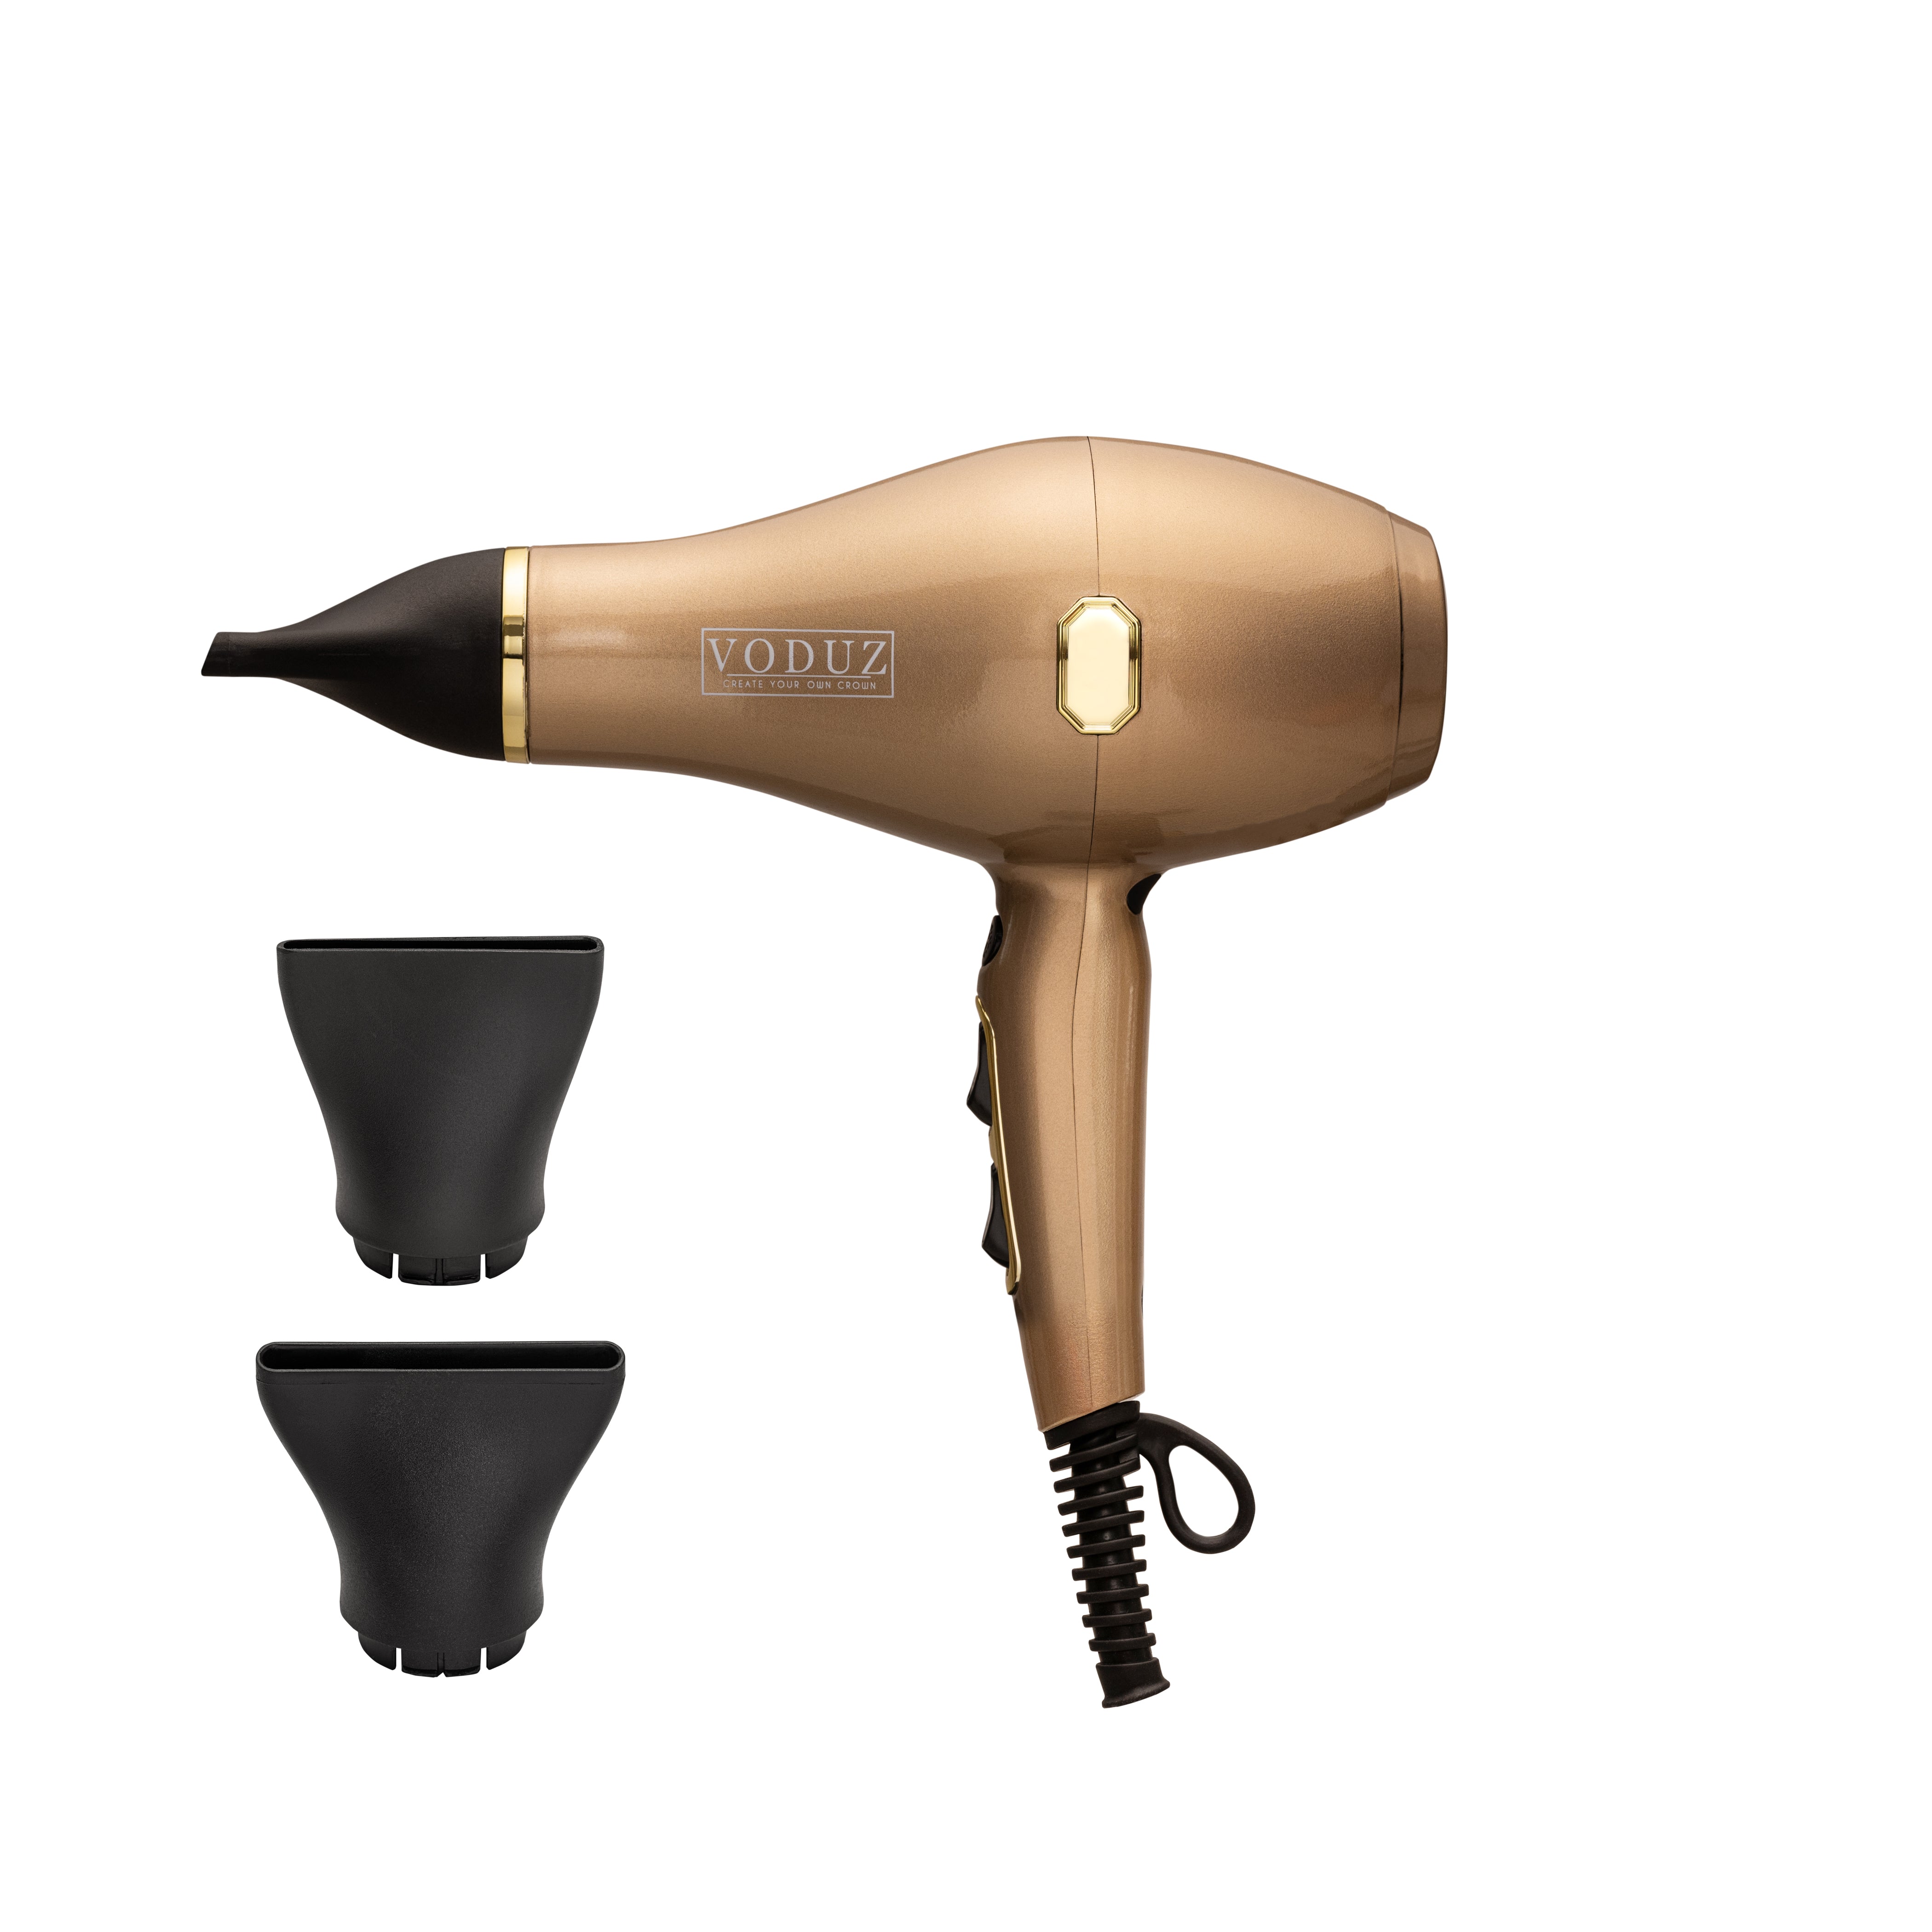 Voduz Blow Out Infrared Hair Dryer - Limited Edition Gold, with 2 nozzles